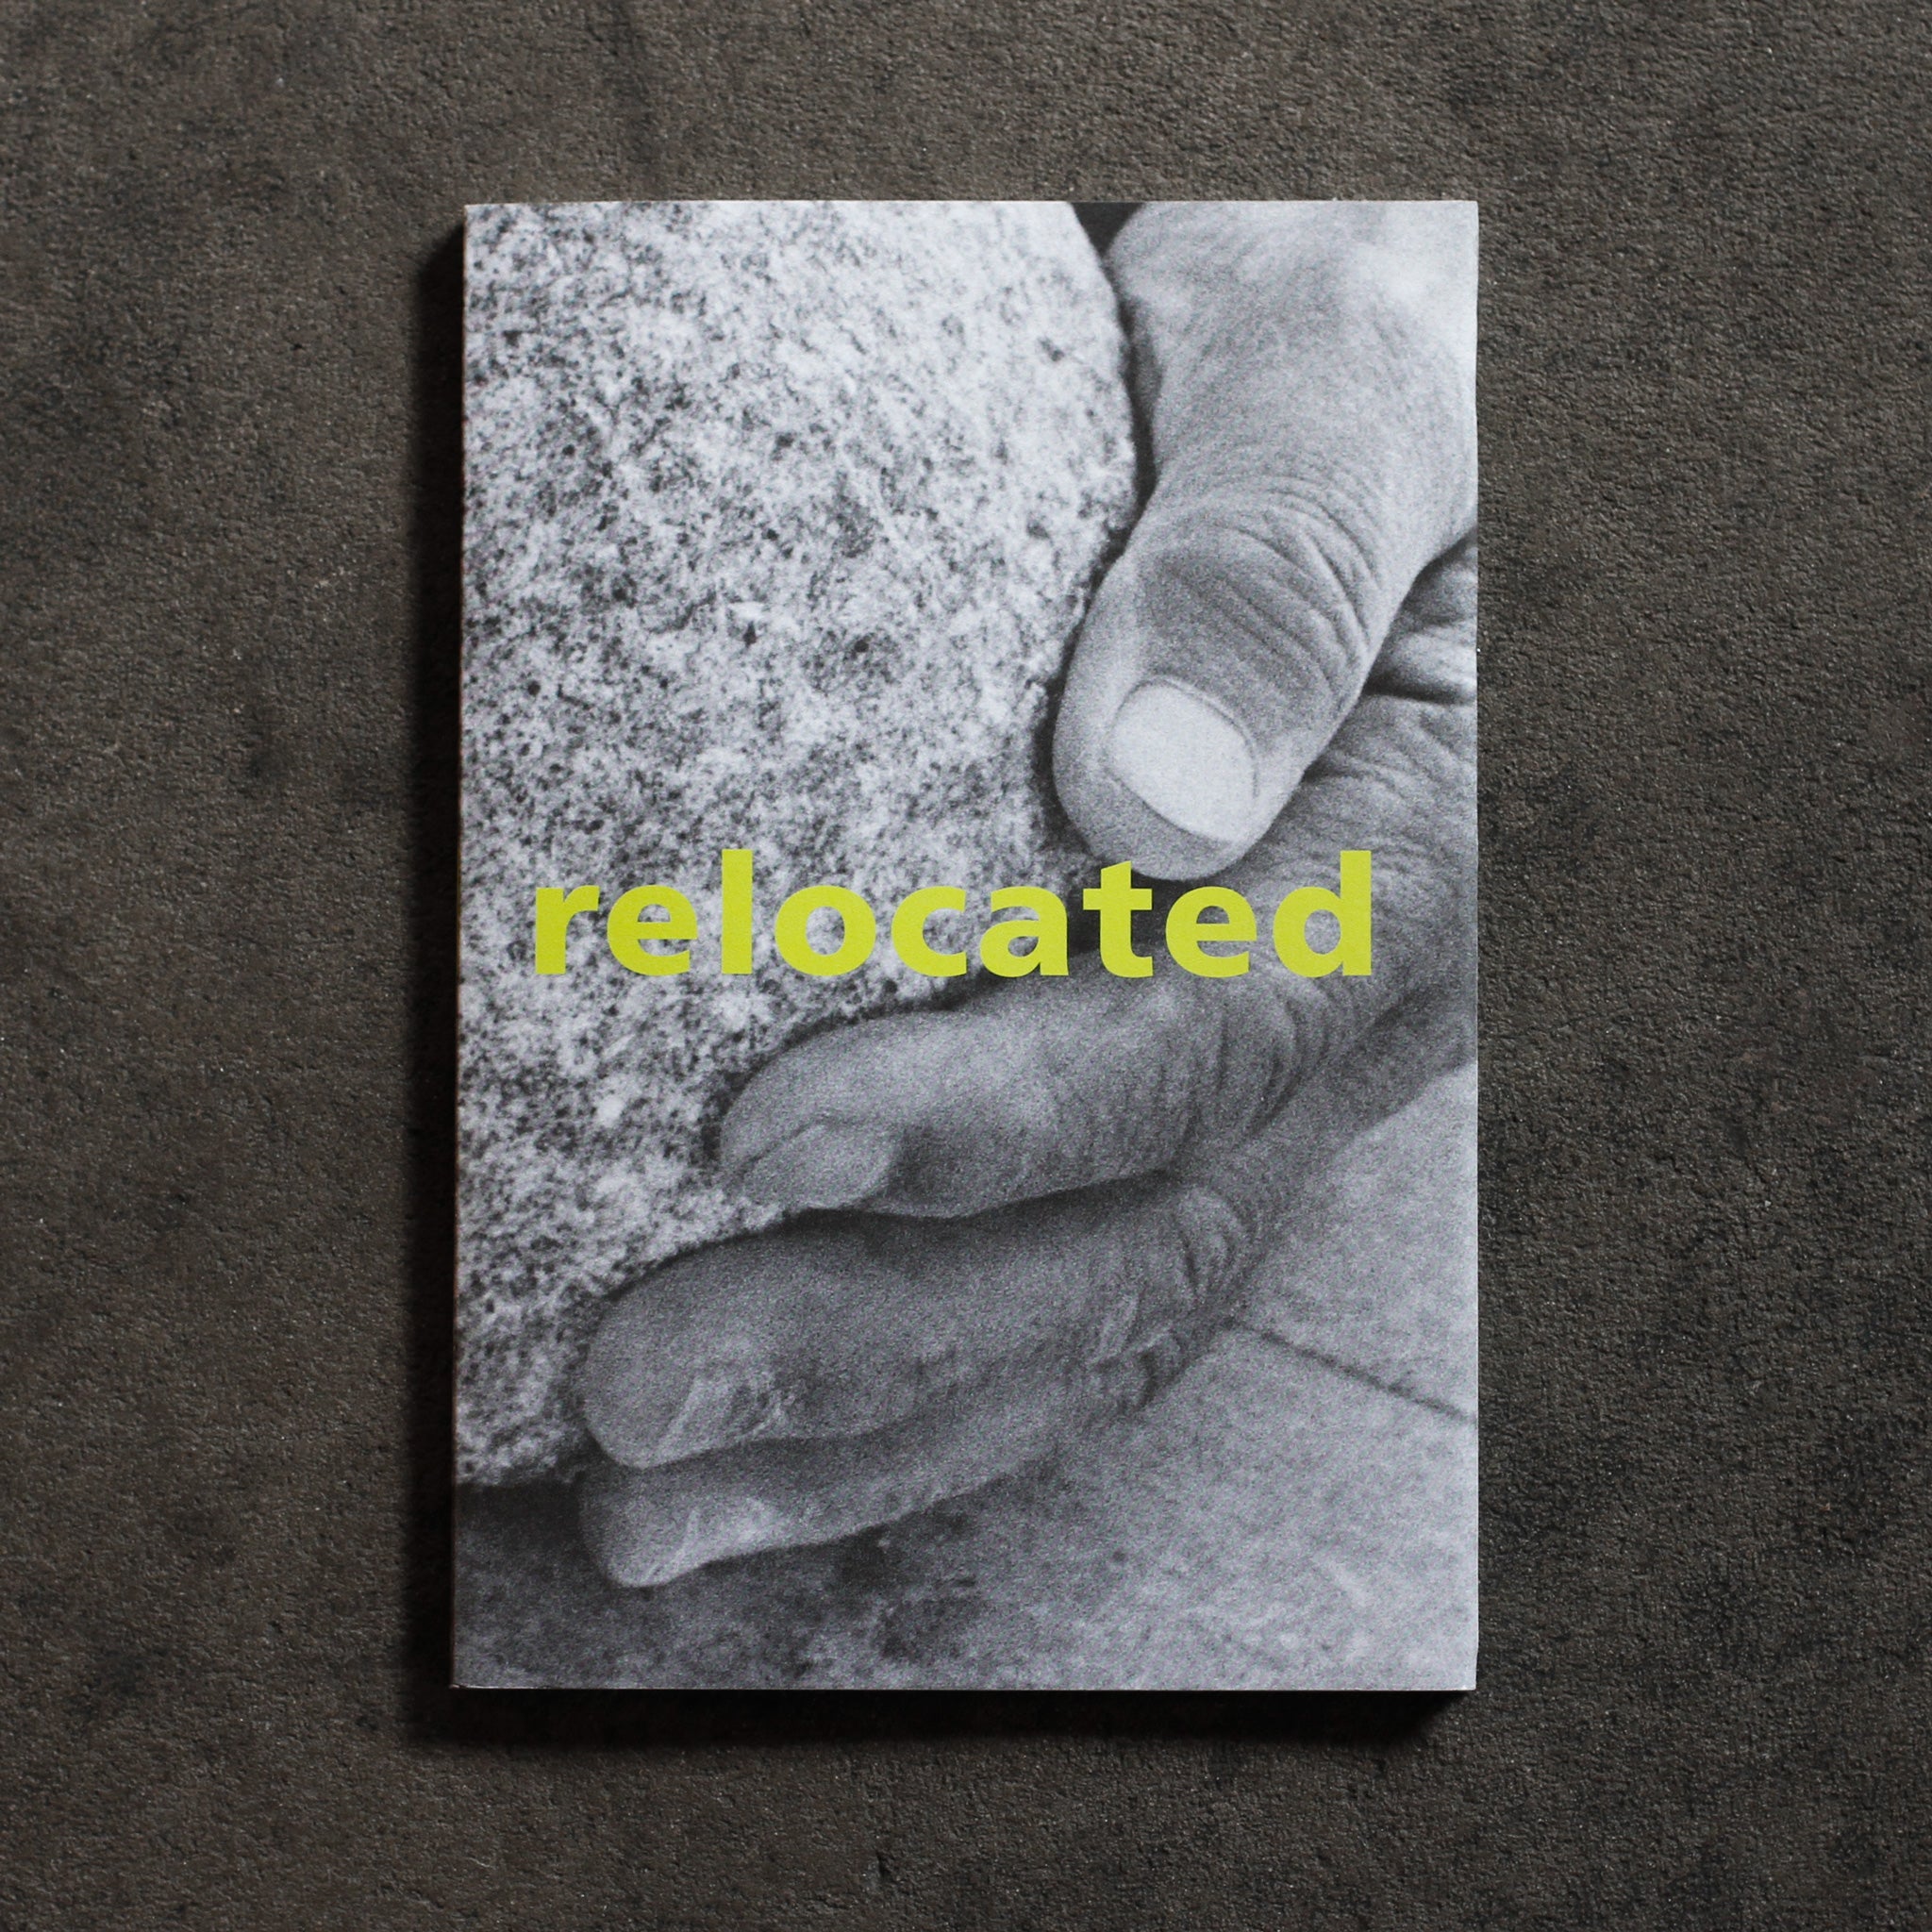 Cover of 'Relocated.' A black and white closeup of Isamu Noguchi's hand holding a chiseled stone, with large headline 'relocated' across the center of the book in large neon yellow sans serif type